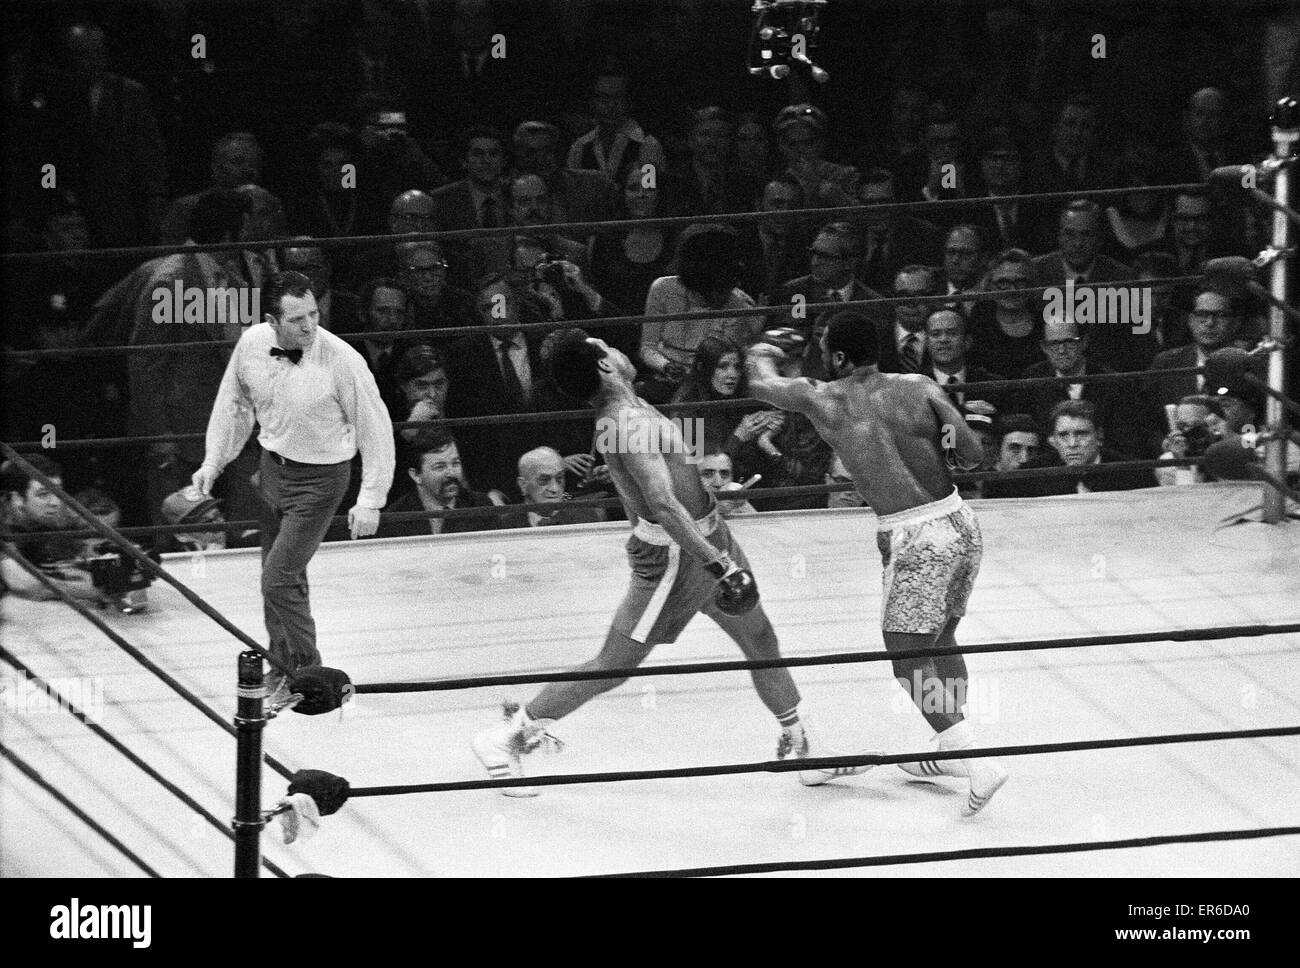 The Fight of the Century (also known as The Fight) is the title boxing writers and historians have given to the boxing match between champion Joe Frazier (26-0, 23 KOs) and challenger Muhammad Ali (31-0, 25 KOs), held on March 8, 1971, at Madison Square G Stock Photo